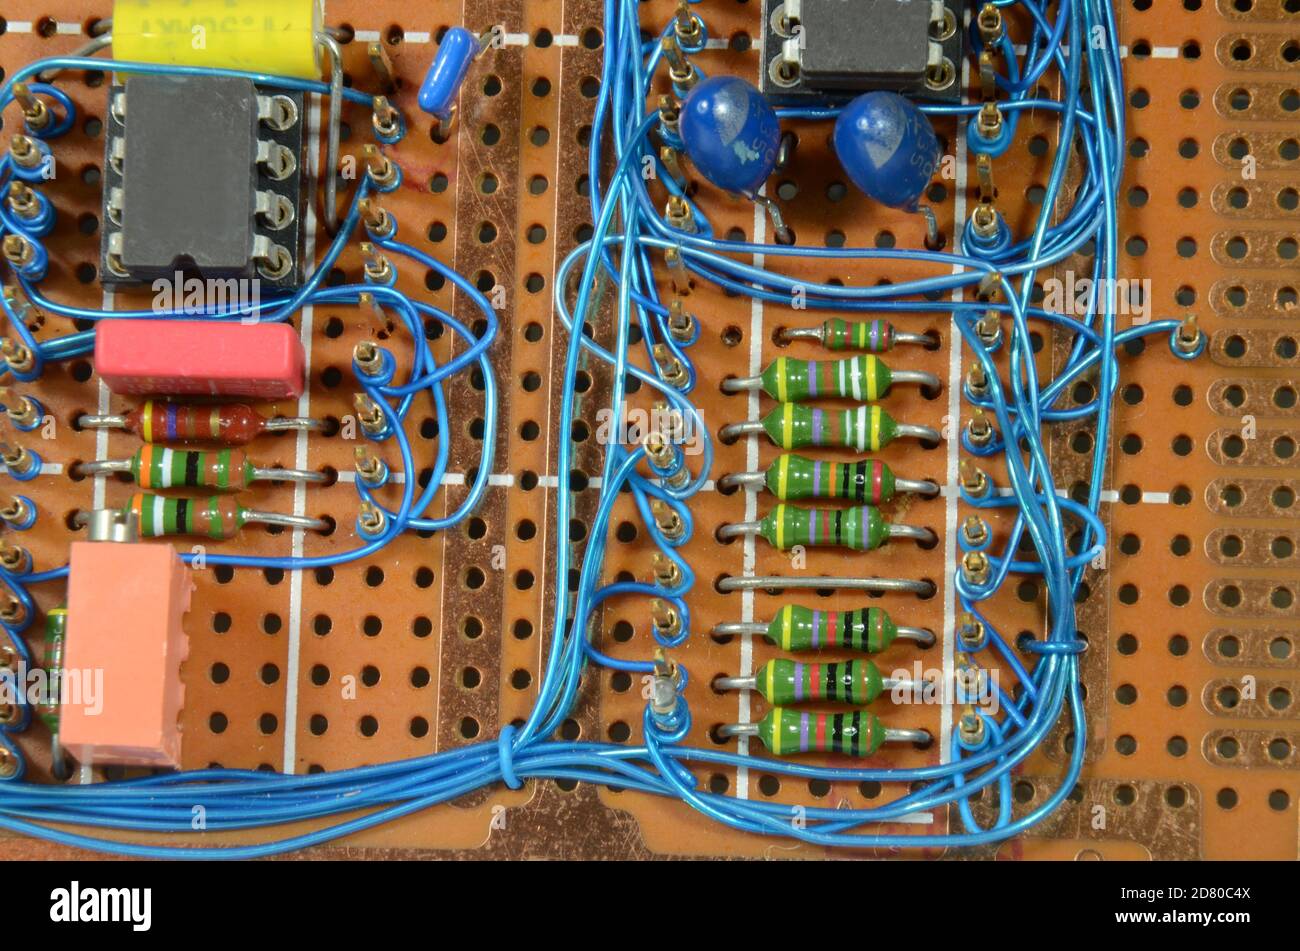 Wiev on prototype circuit board, connections are made with wire wrap  technology Stock Photo - Alamy